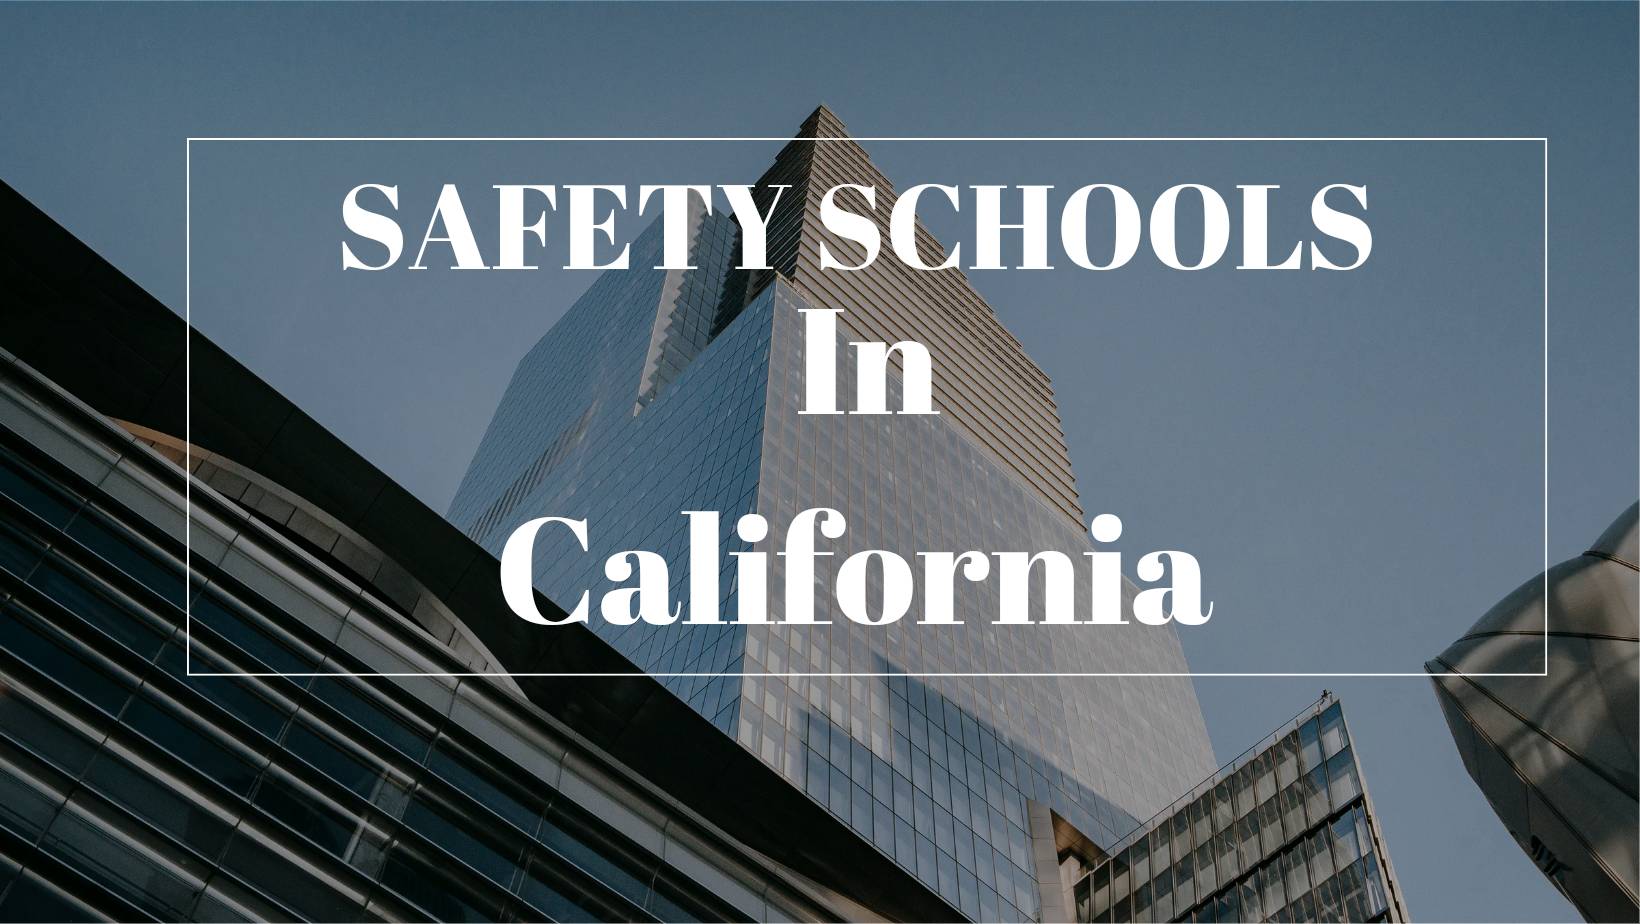 Safety Schools in California